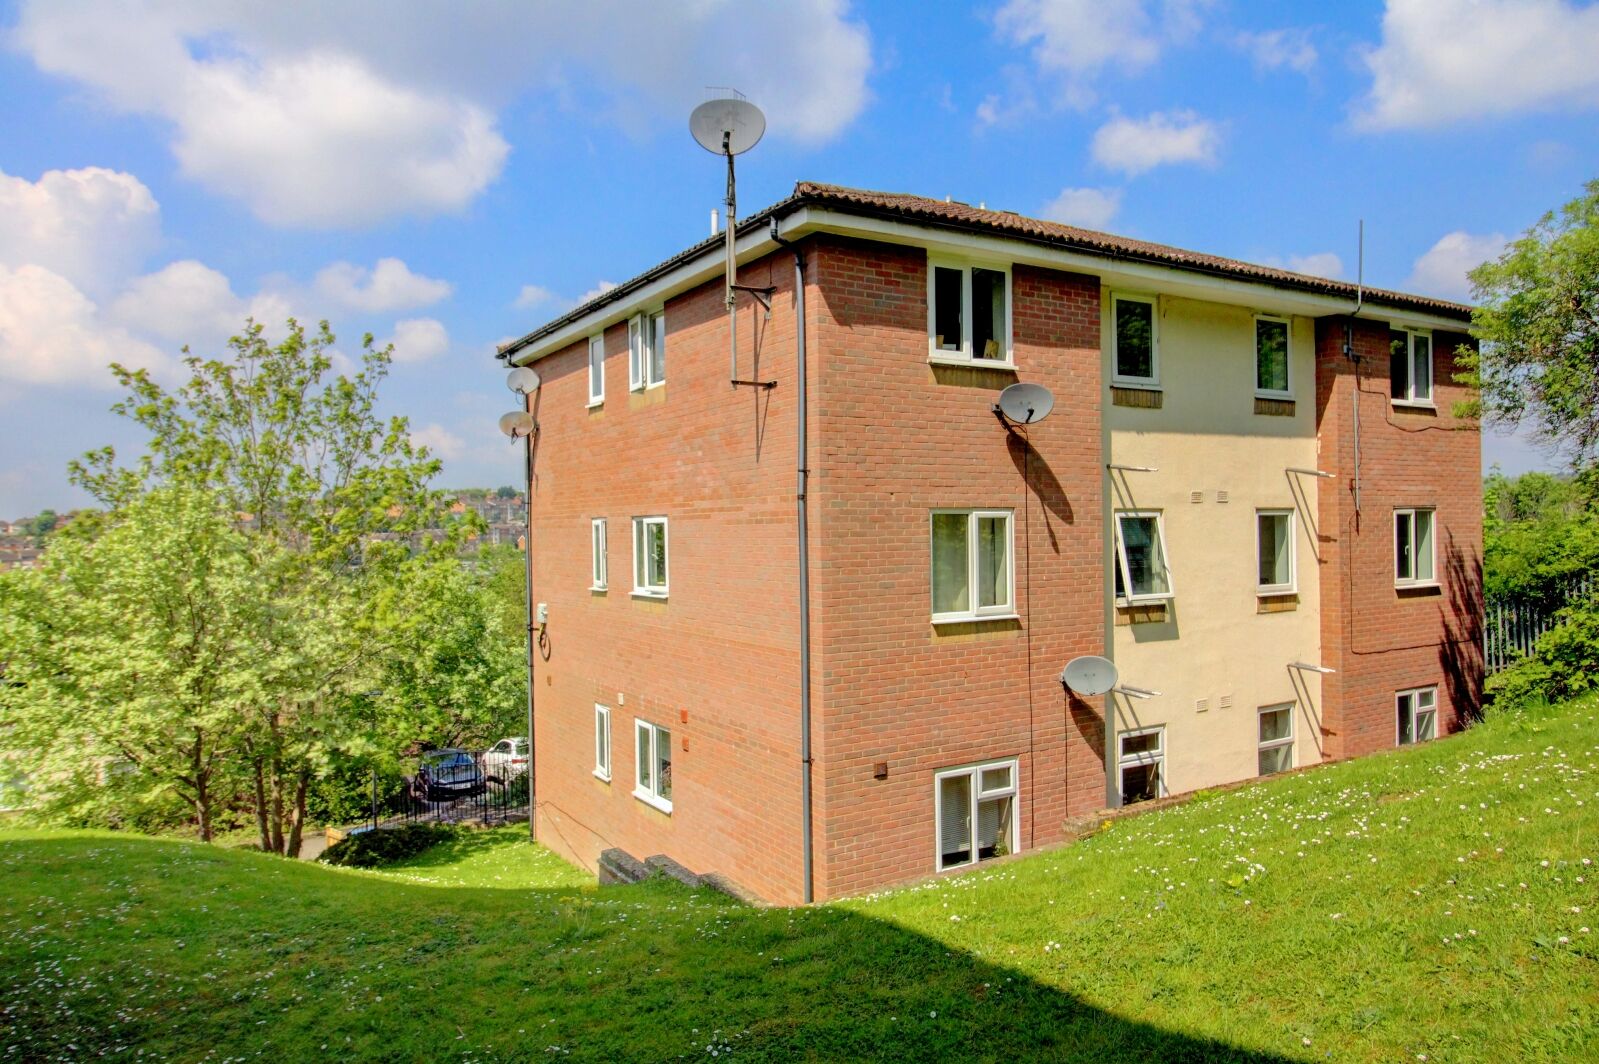 2 bedroom  flat for sale Lingfield Close, High Wycombe, HP13, main image